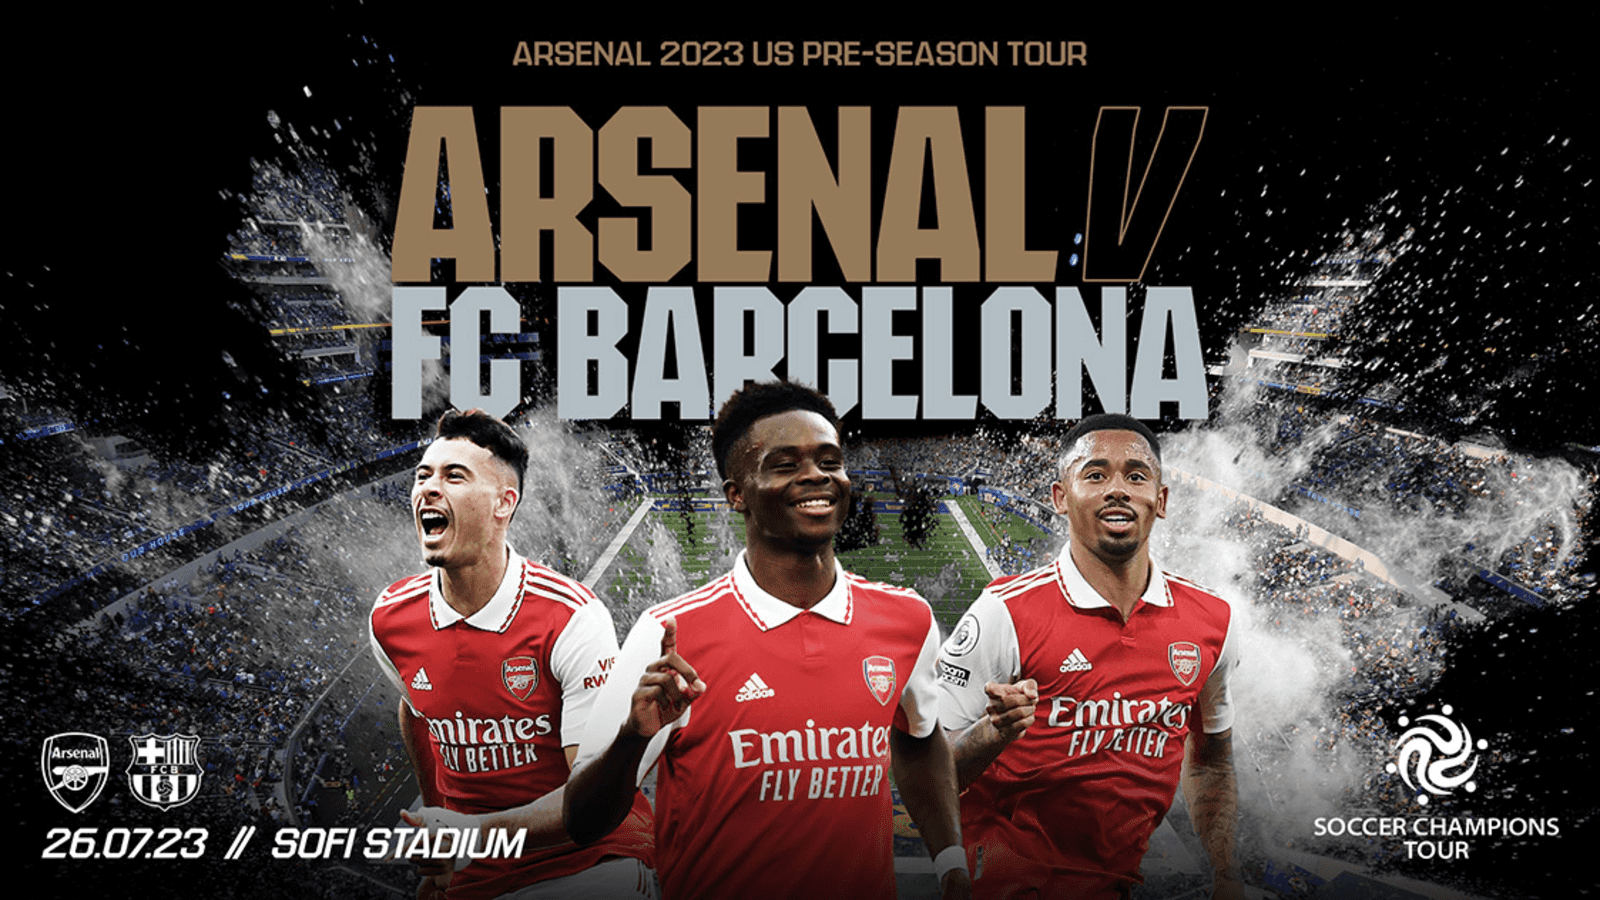 Arsenal to play Barcelona in Los Angeles